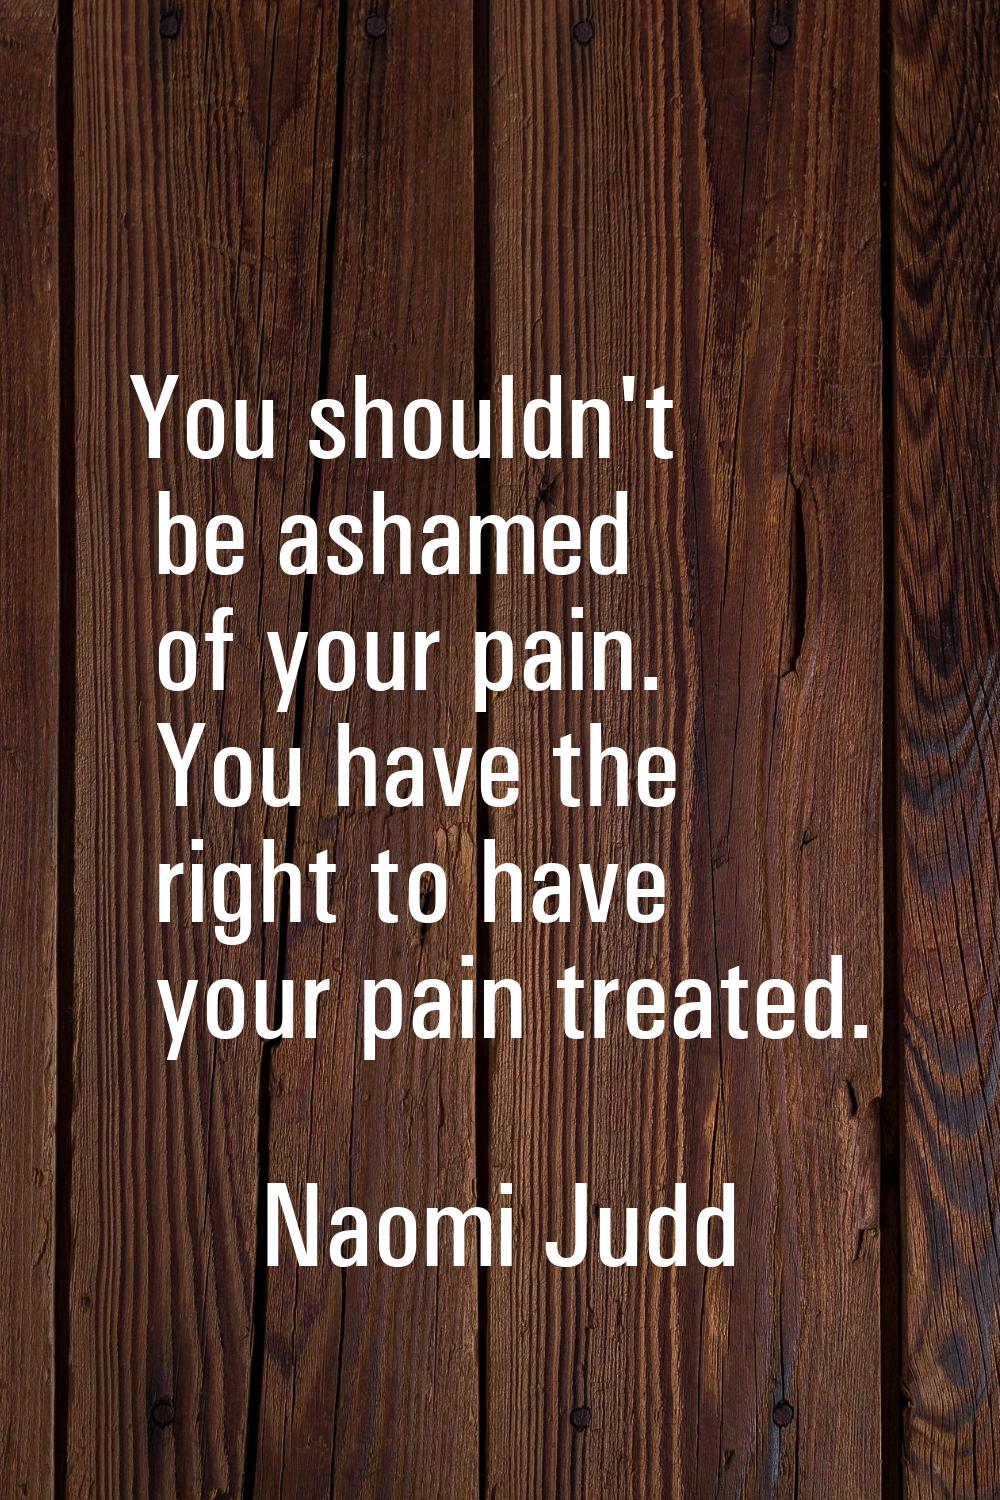 You shouldn't be ashamed of your pain. You have the right to have your pain treated.